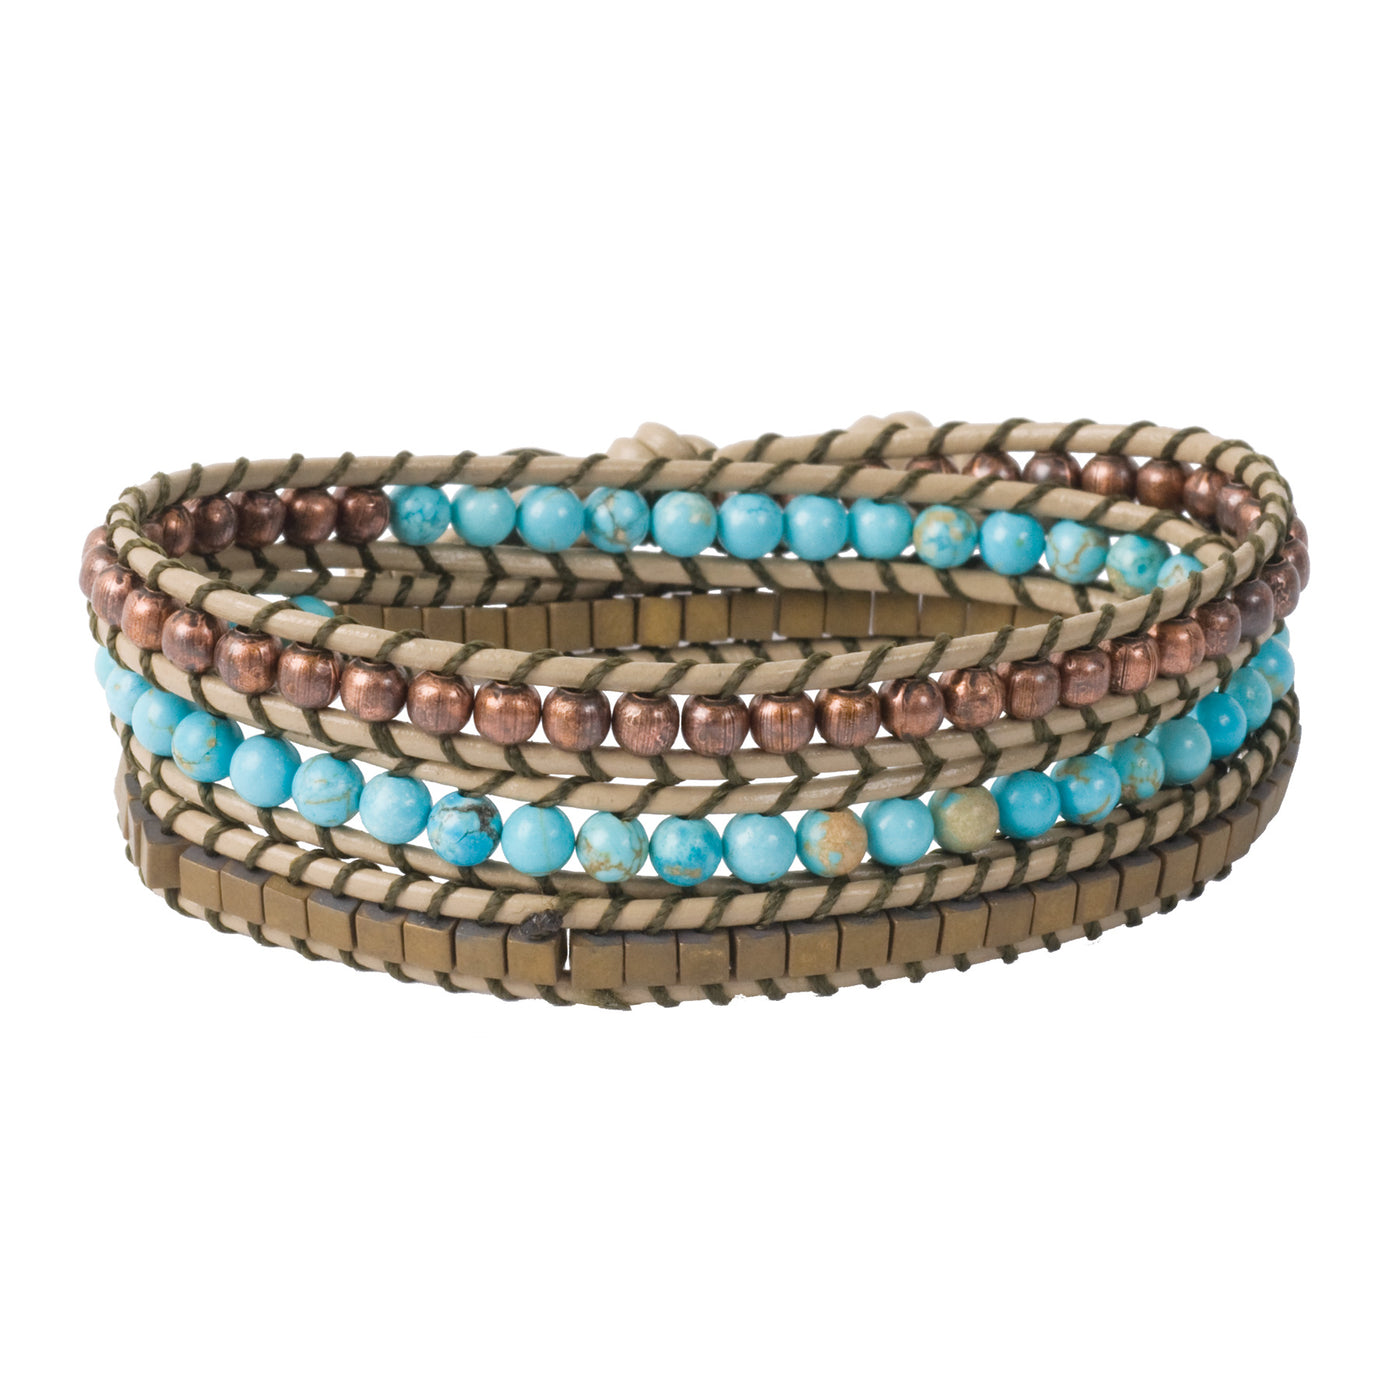 Bracelet Pack - Multi Color & Turquoise Beads – Made by Nami EU